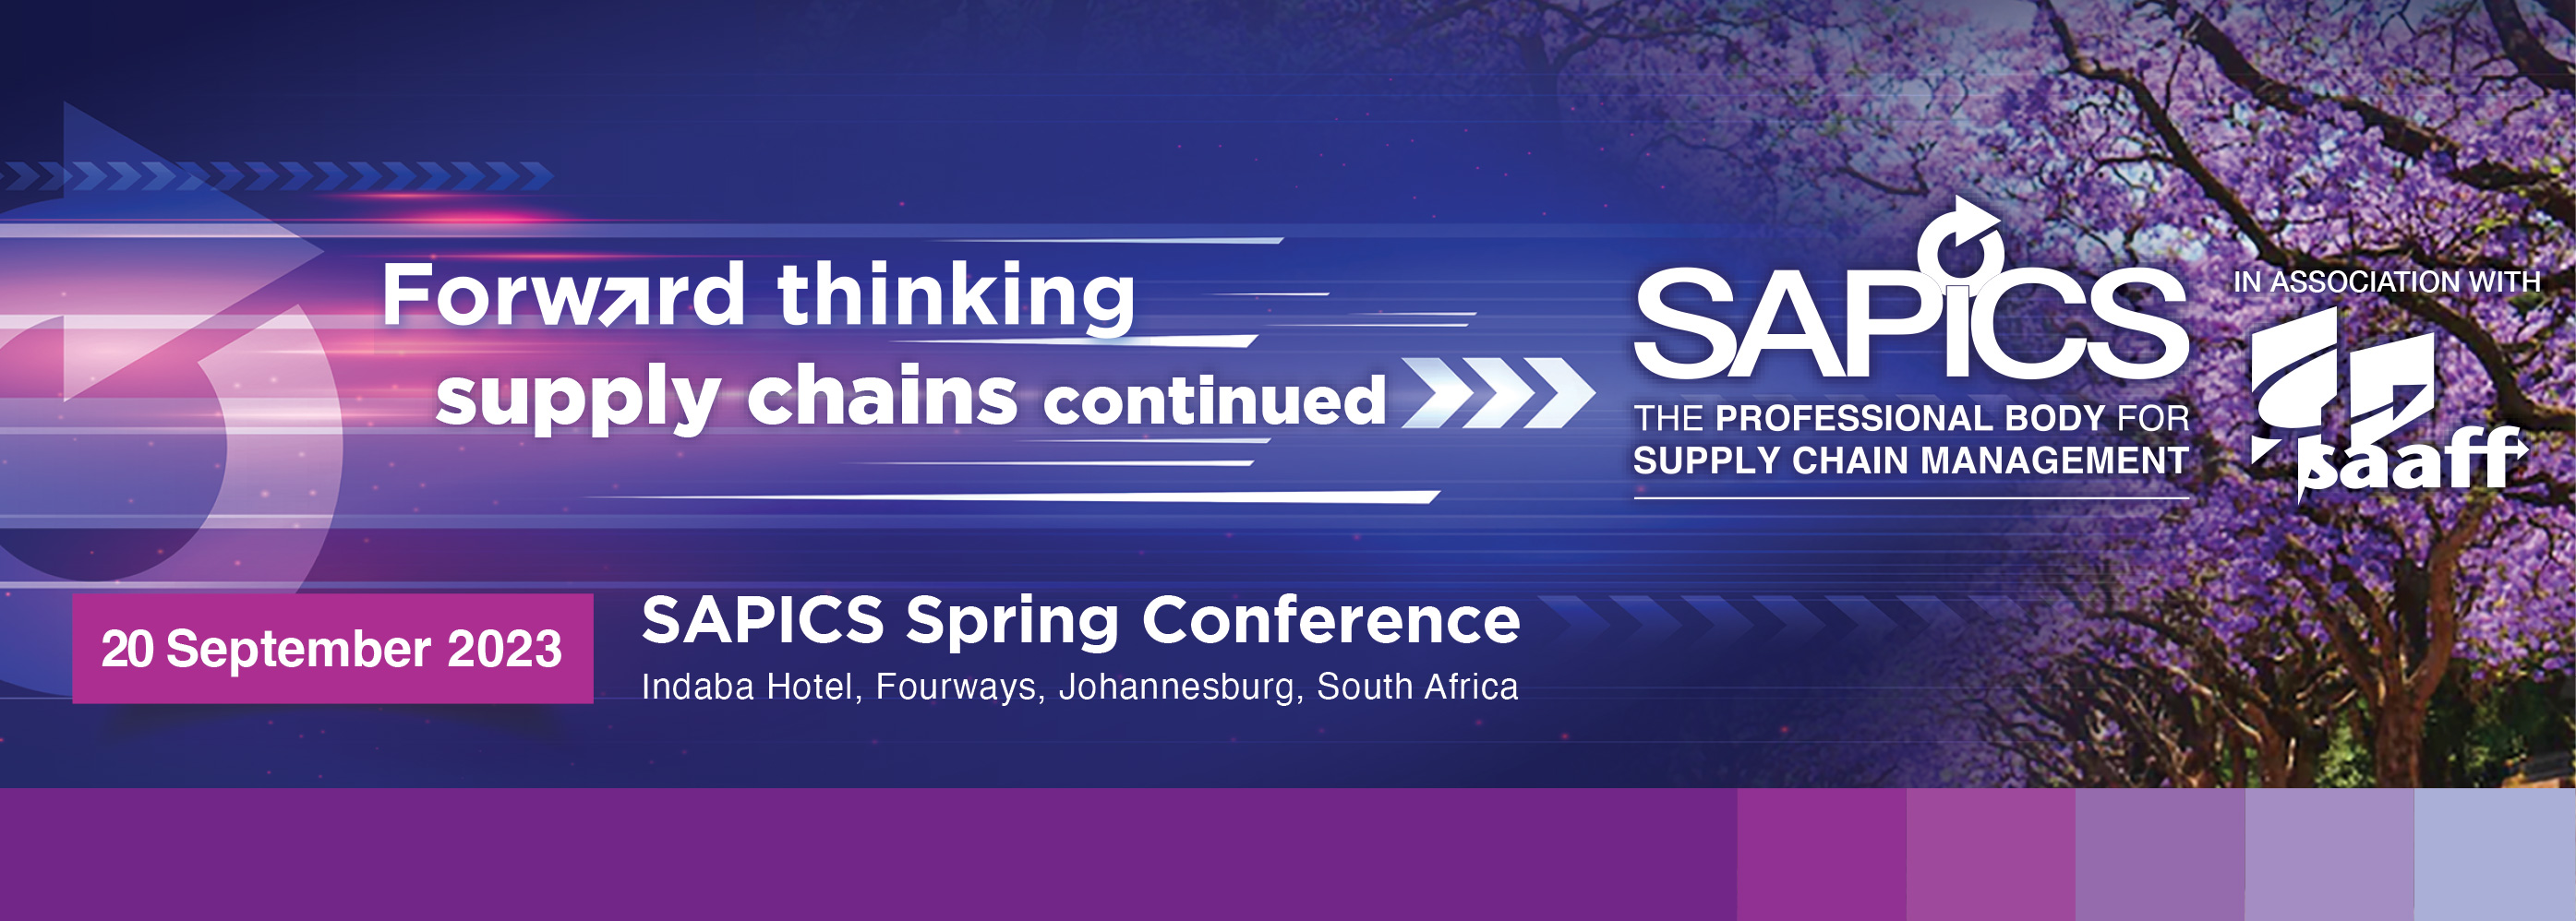 SAPICS Spring Conference banner